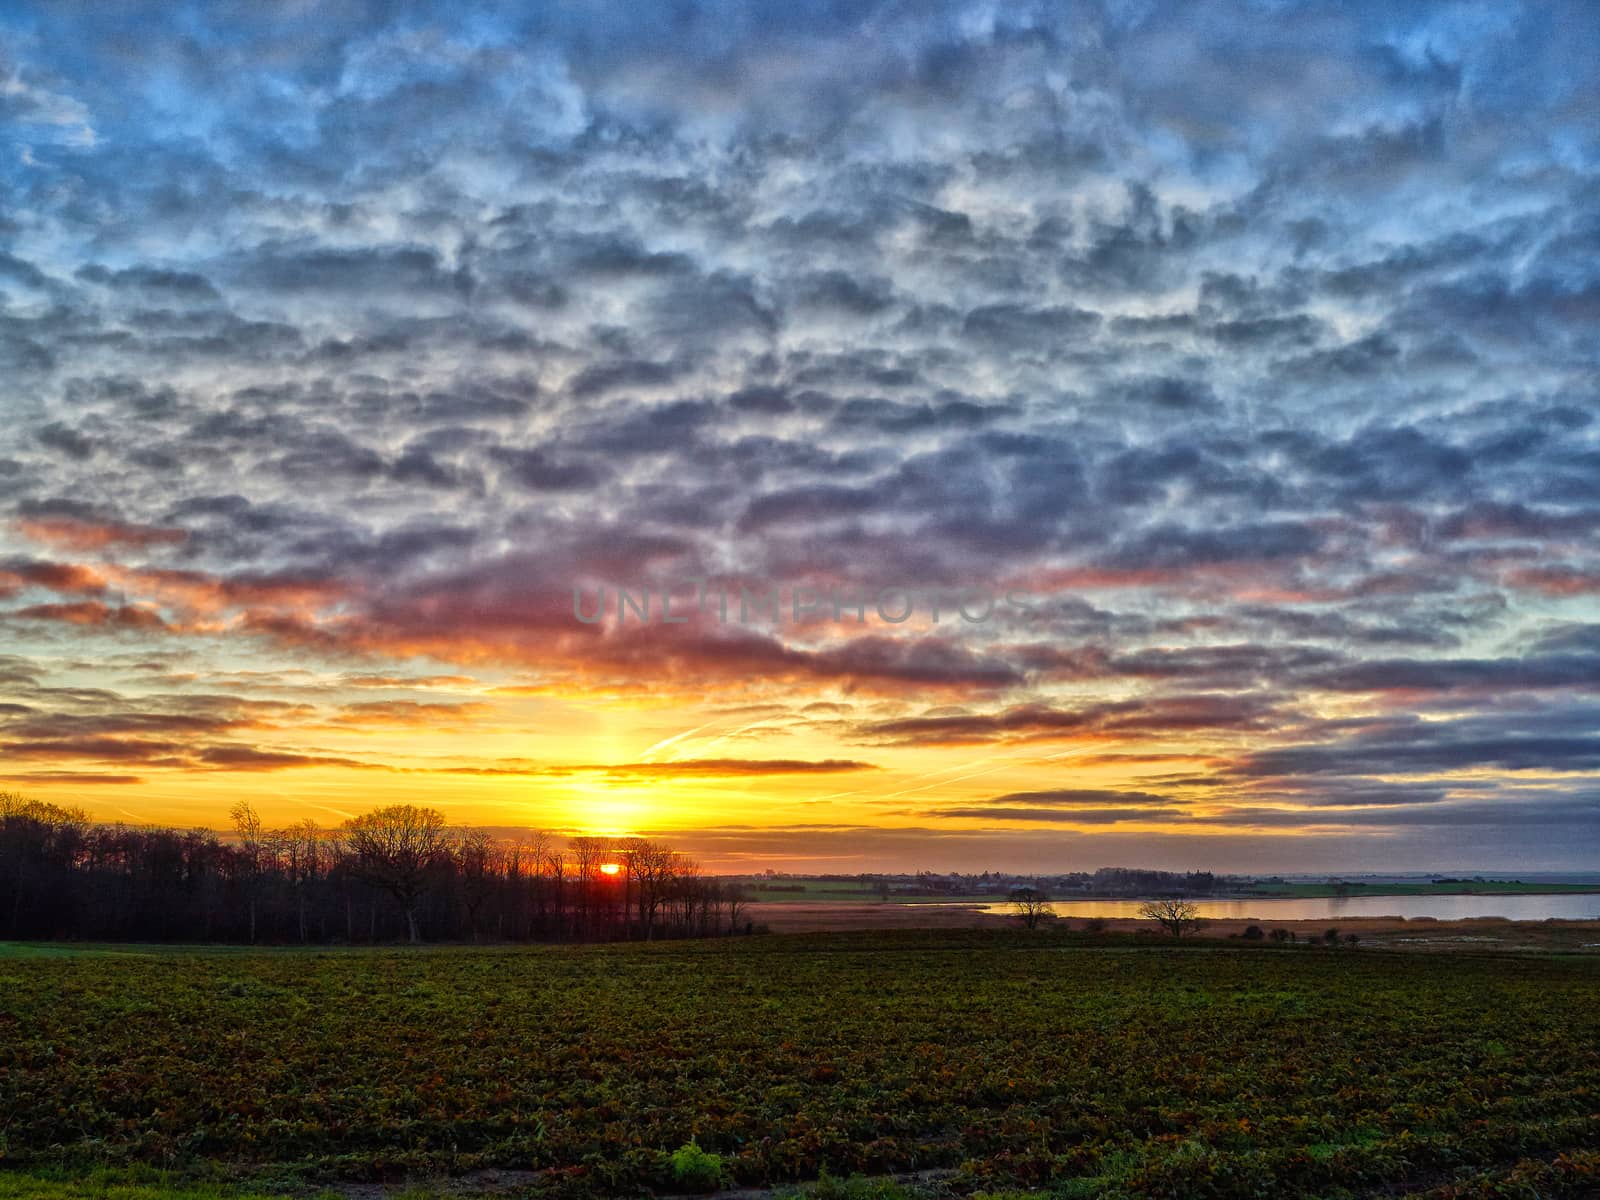 Landscape of green fields and a dramatic sunset by Ronyzmbow